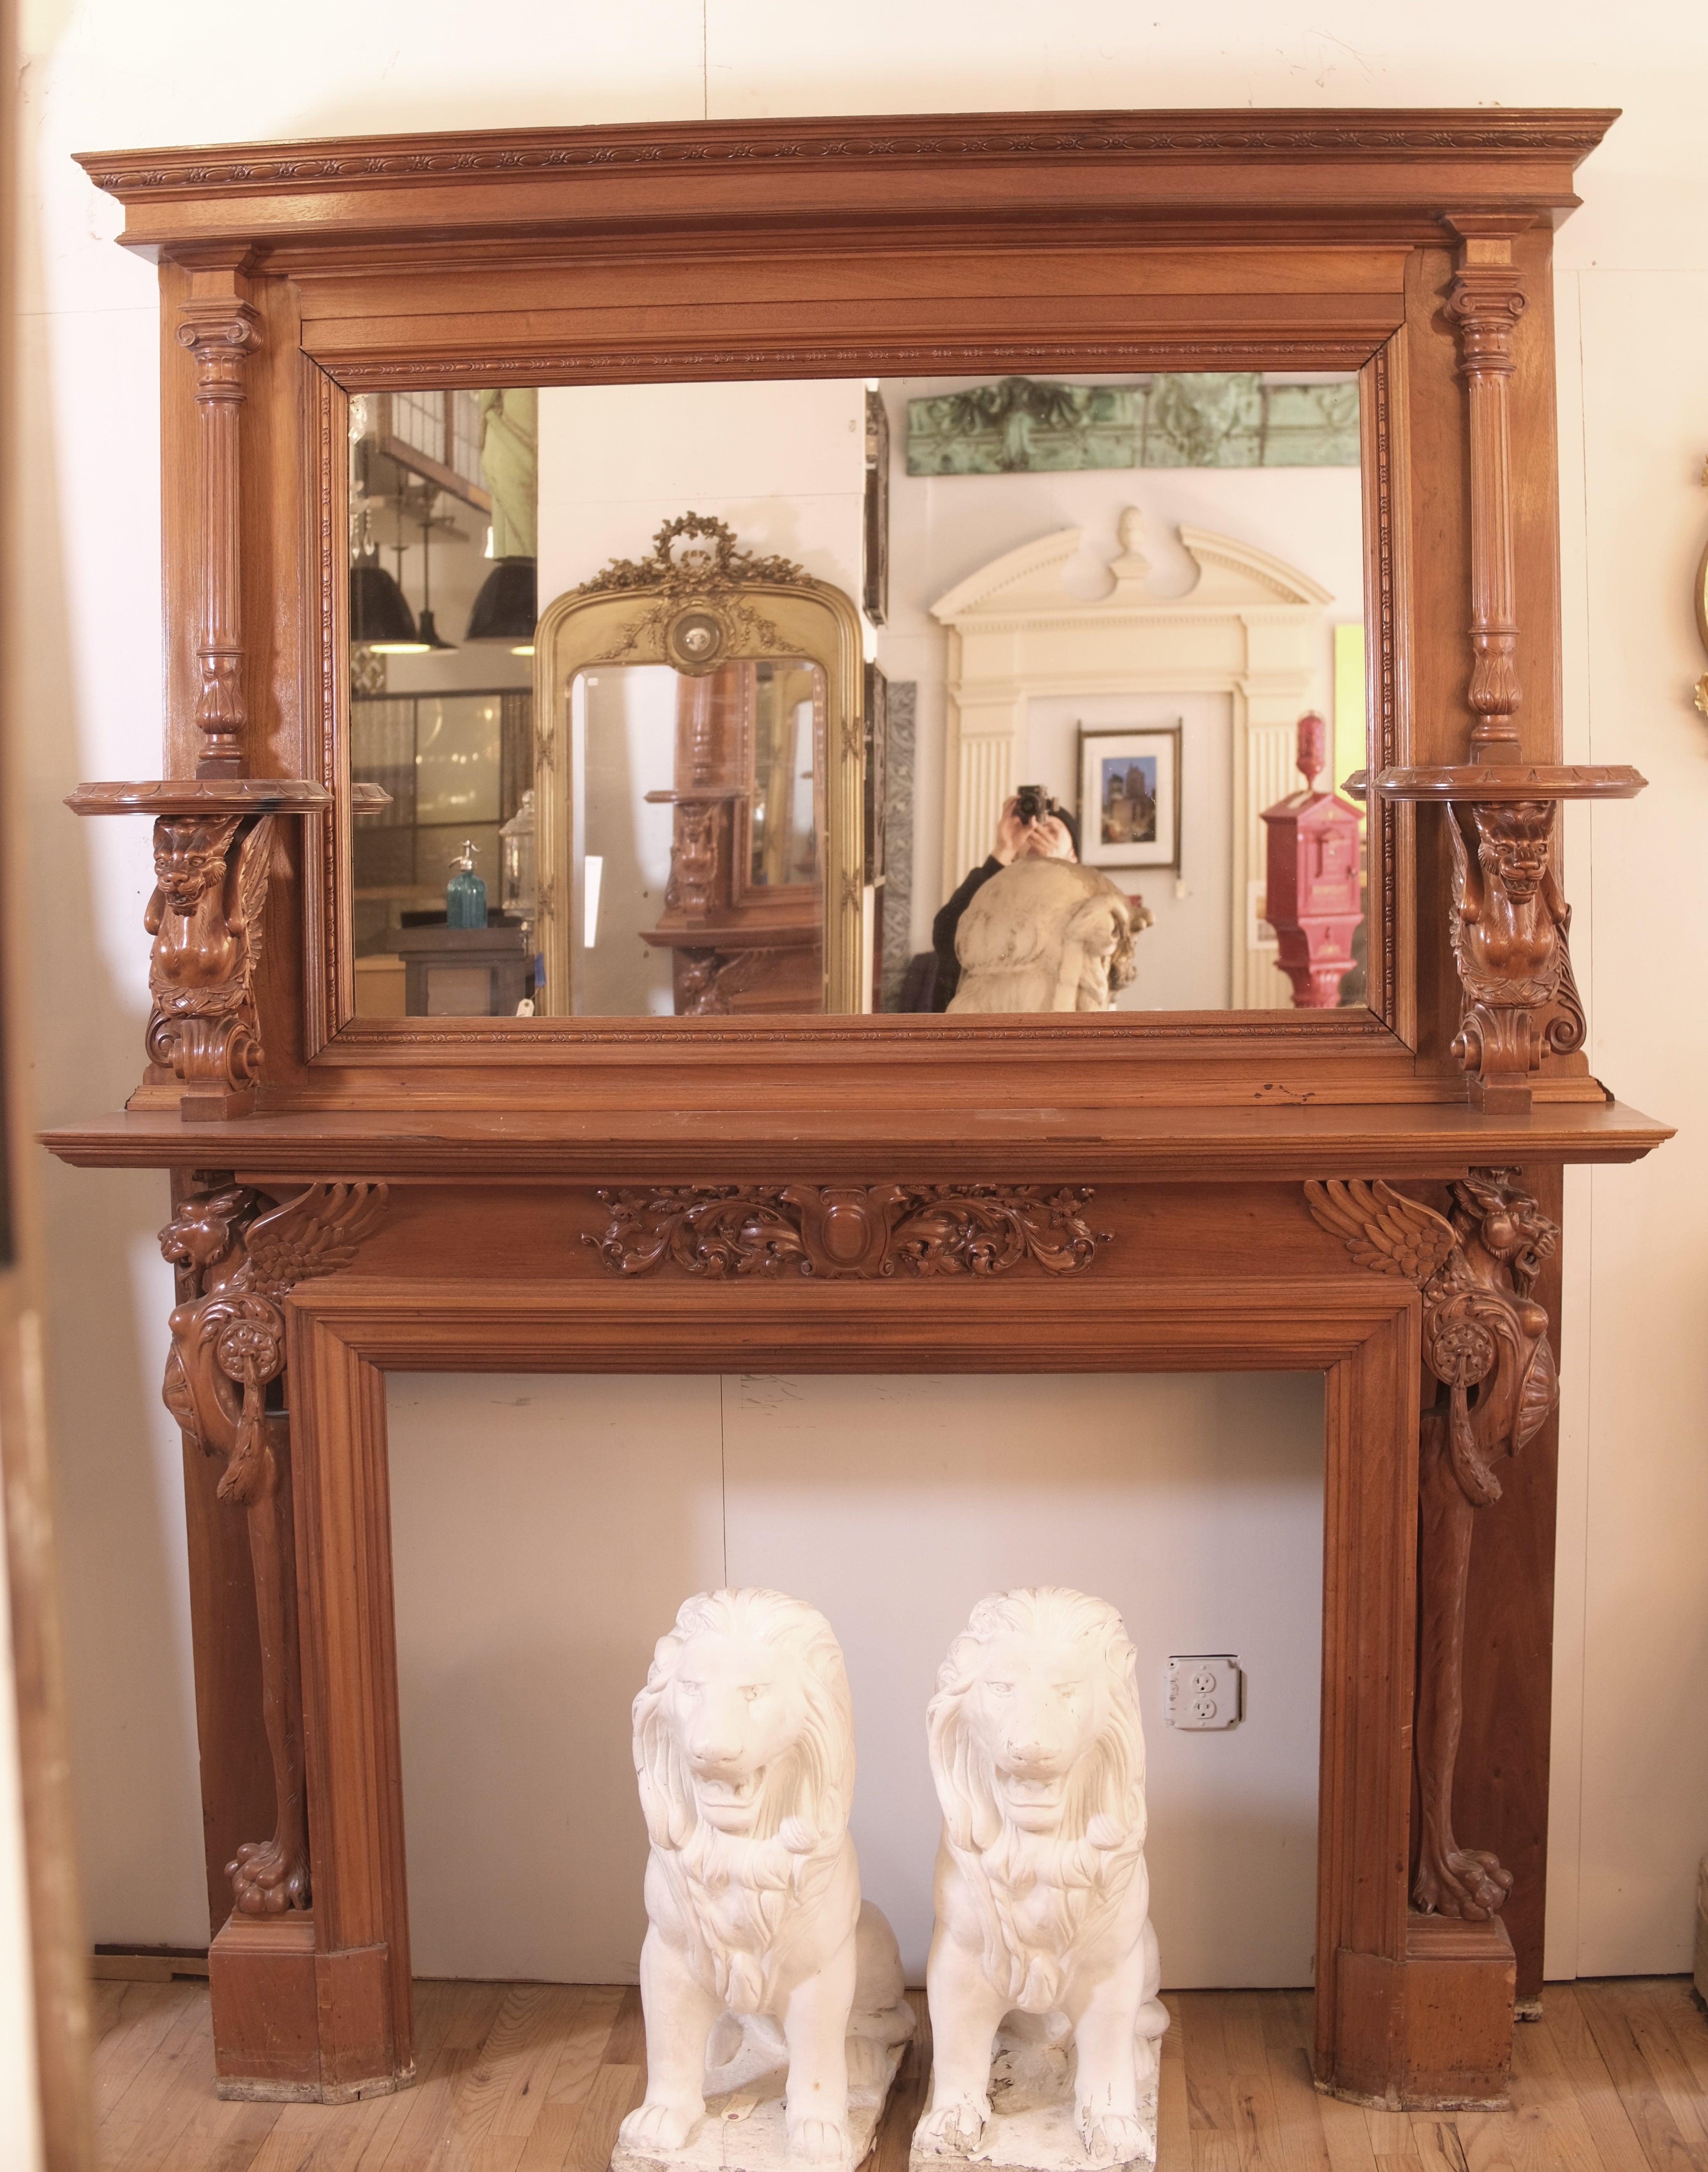 Late 1800s American hand carved mahogany mantel. Features over the top details including four separate griffins flanking the two sides with columns. Also features flower and floral details with leaves and stylized dragons feet on the bottom resting